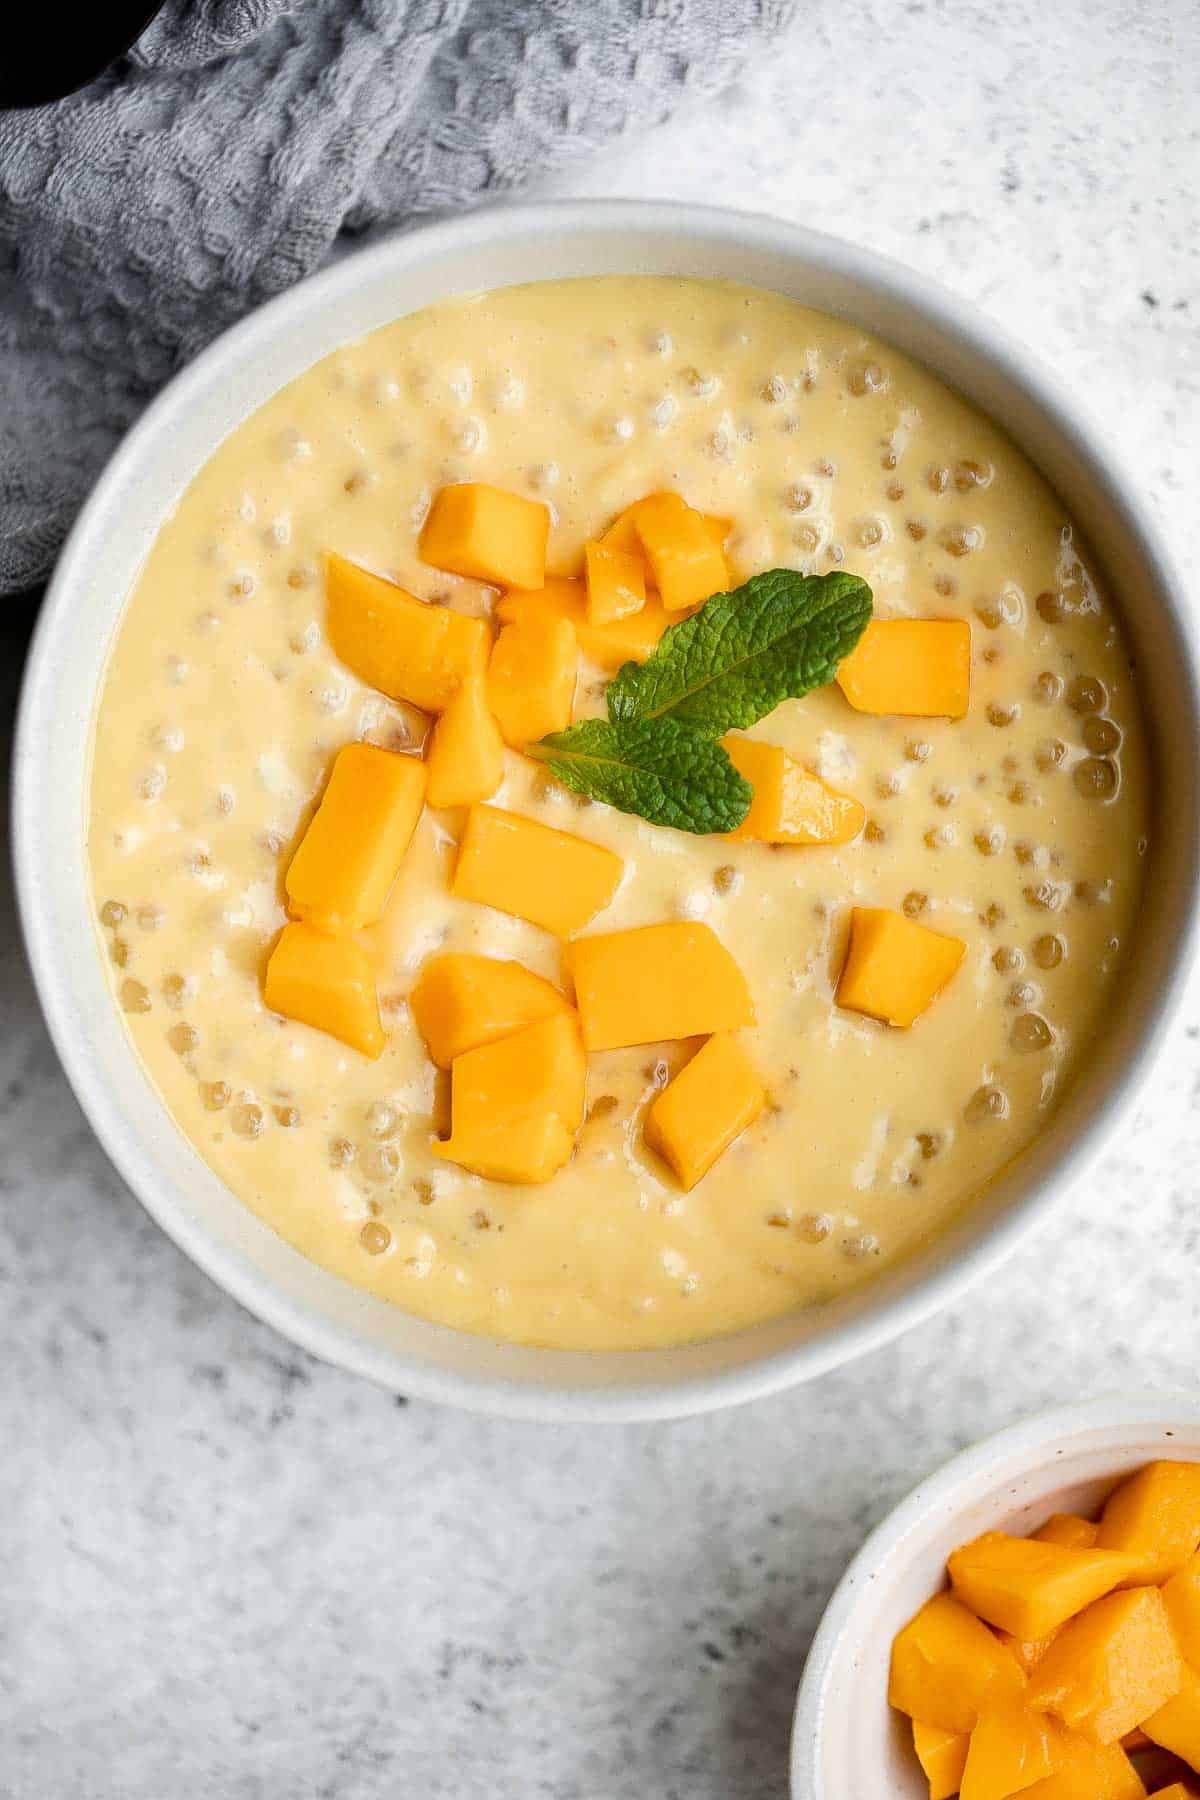 Mango sago is a popular Asian dessert that’s creamy, fruity, cold tapioca pudding dessert is easy to make at home with just a few simple ingredients. | aheadofthyme.com